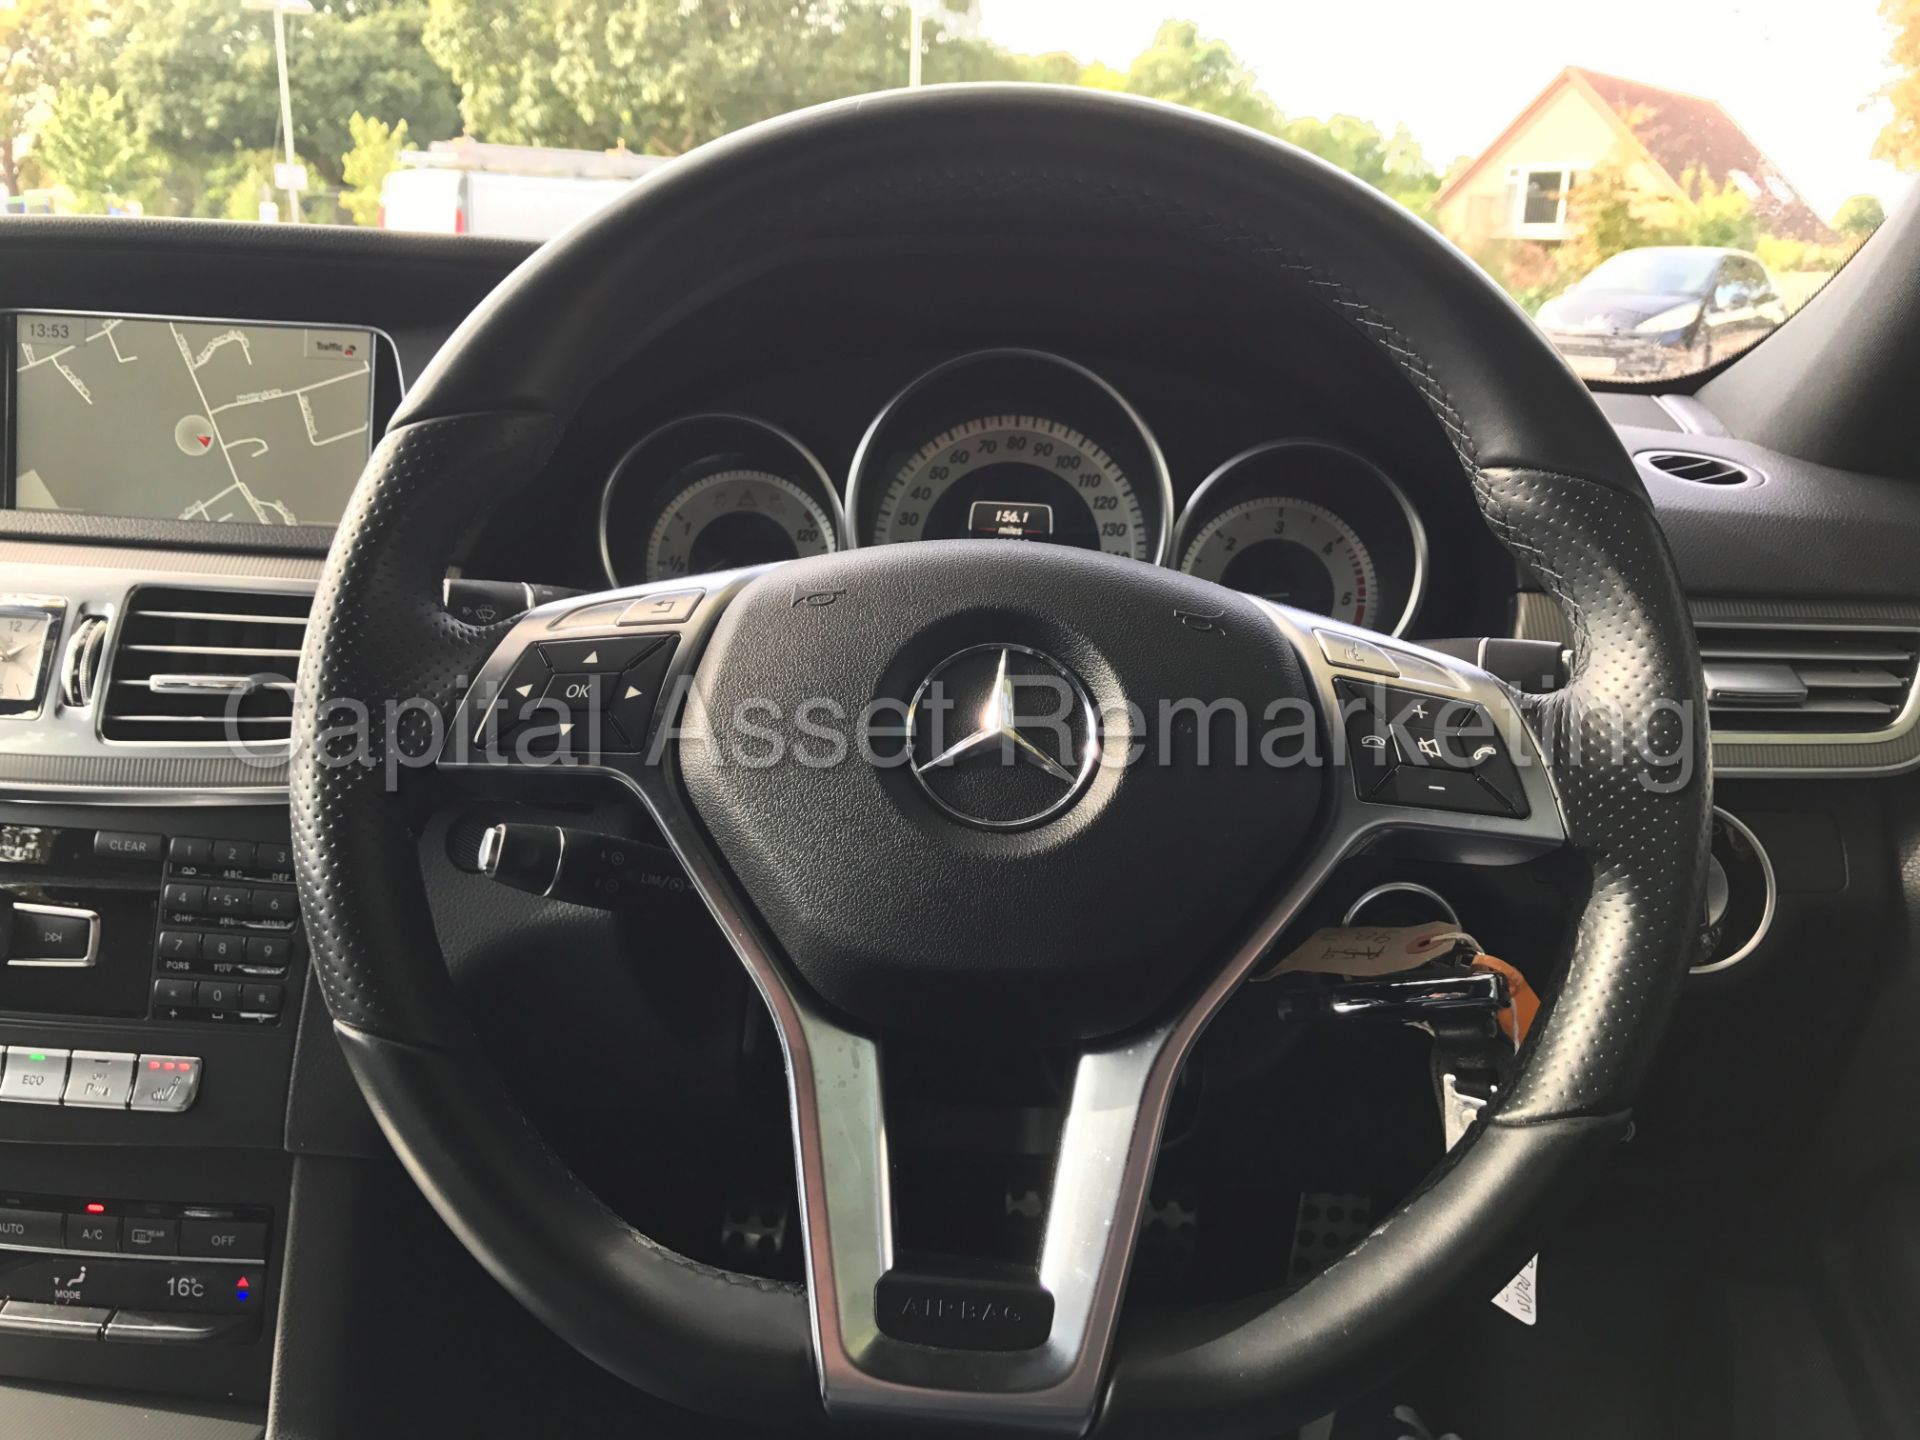 MERCEDES-BENZ E220 'AMG SPORT' (2015 MODEL) 'SALOON - AUTO - PAN ROOF - SAT NAV - LEATHER' *LOOK* - Image 18 of 33